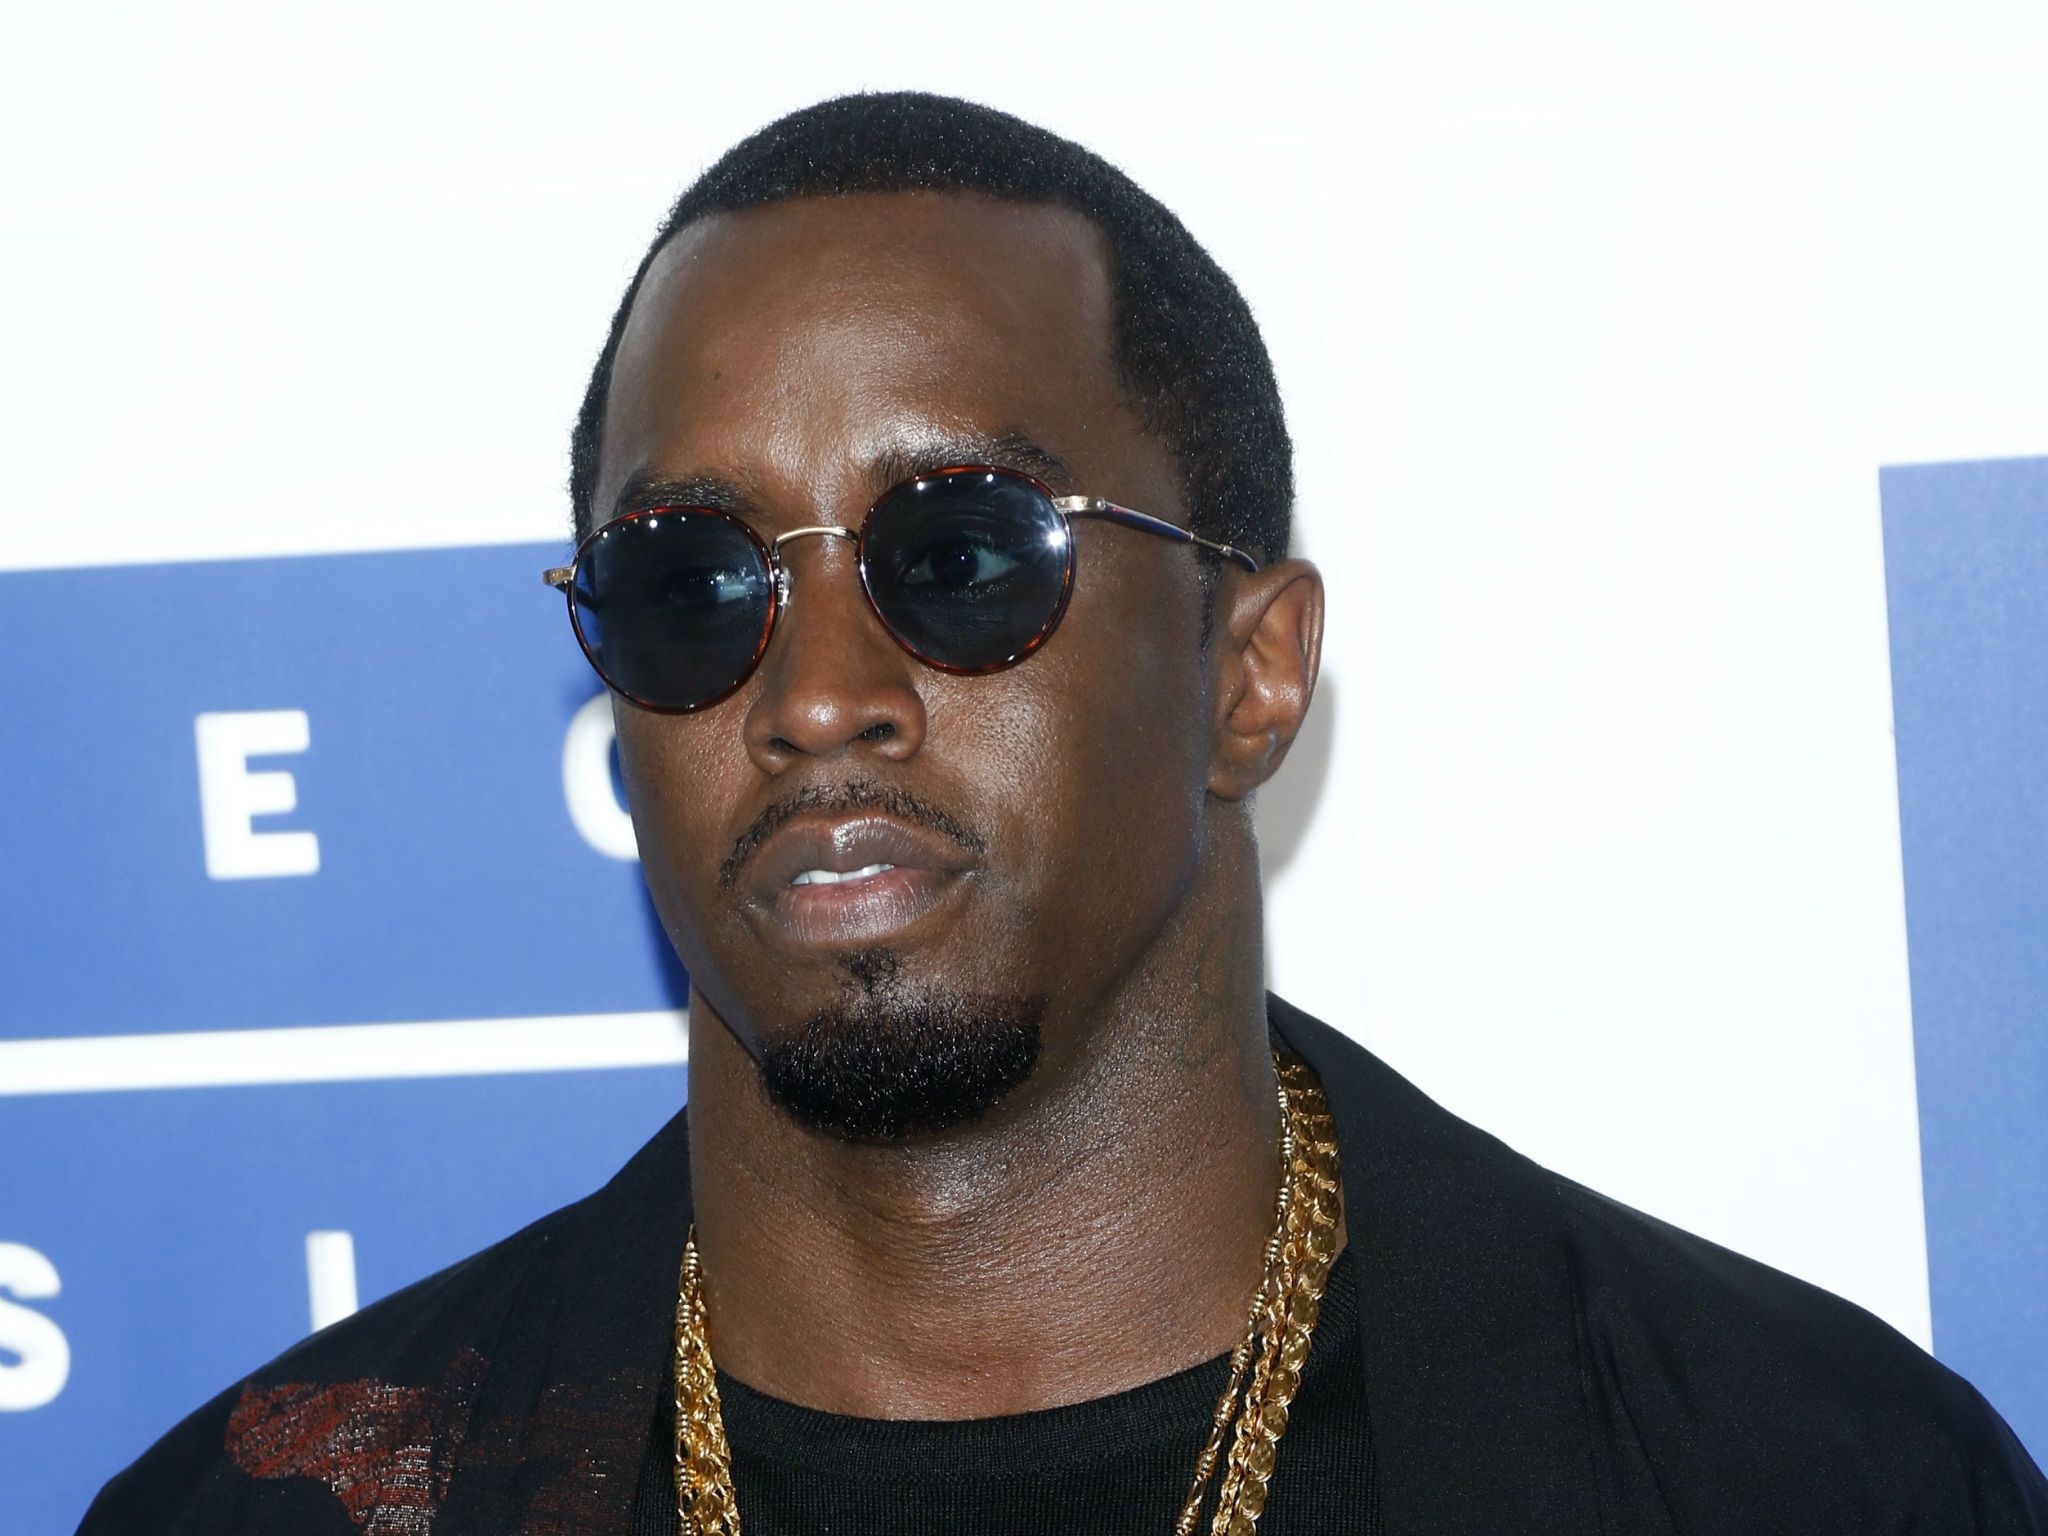 P. Diddy (Sean Combs) Wallpapers (45+ images inside)